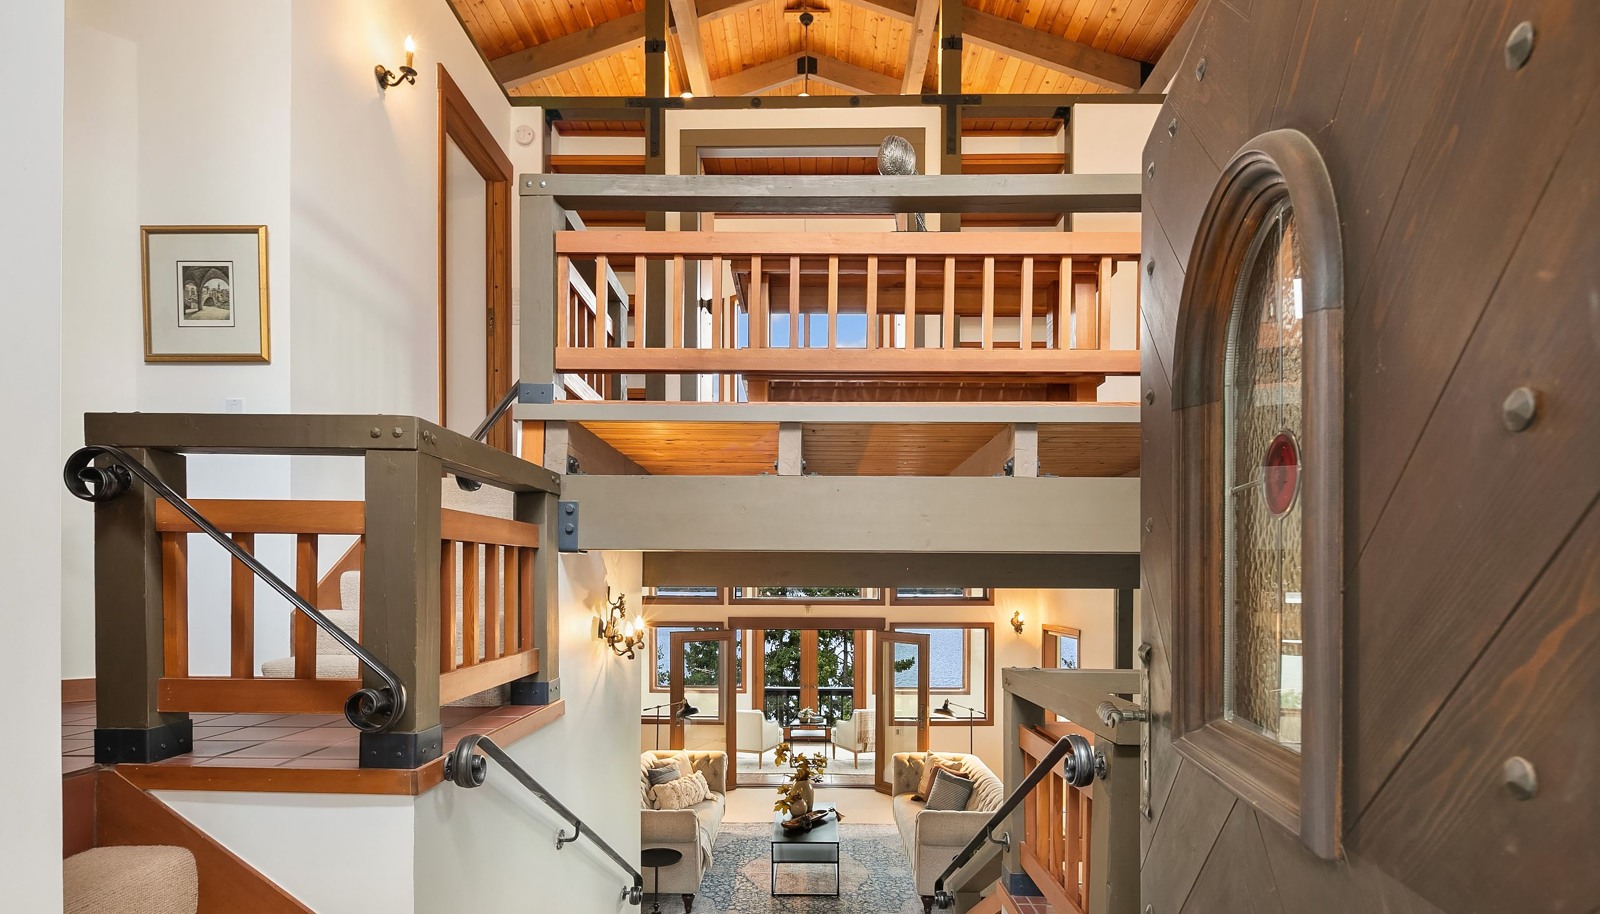 Beautiful custom mill / woodwork, attention to detail and top quality construction attract your immediate attention upon entering this home, until you find yourself totally captivated by the coveted, 180 degree unobstructed westerly Lake, city, mountain and sunset views from every main living space in this treasured home.